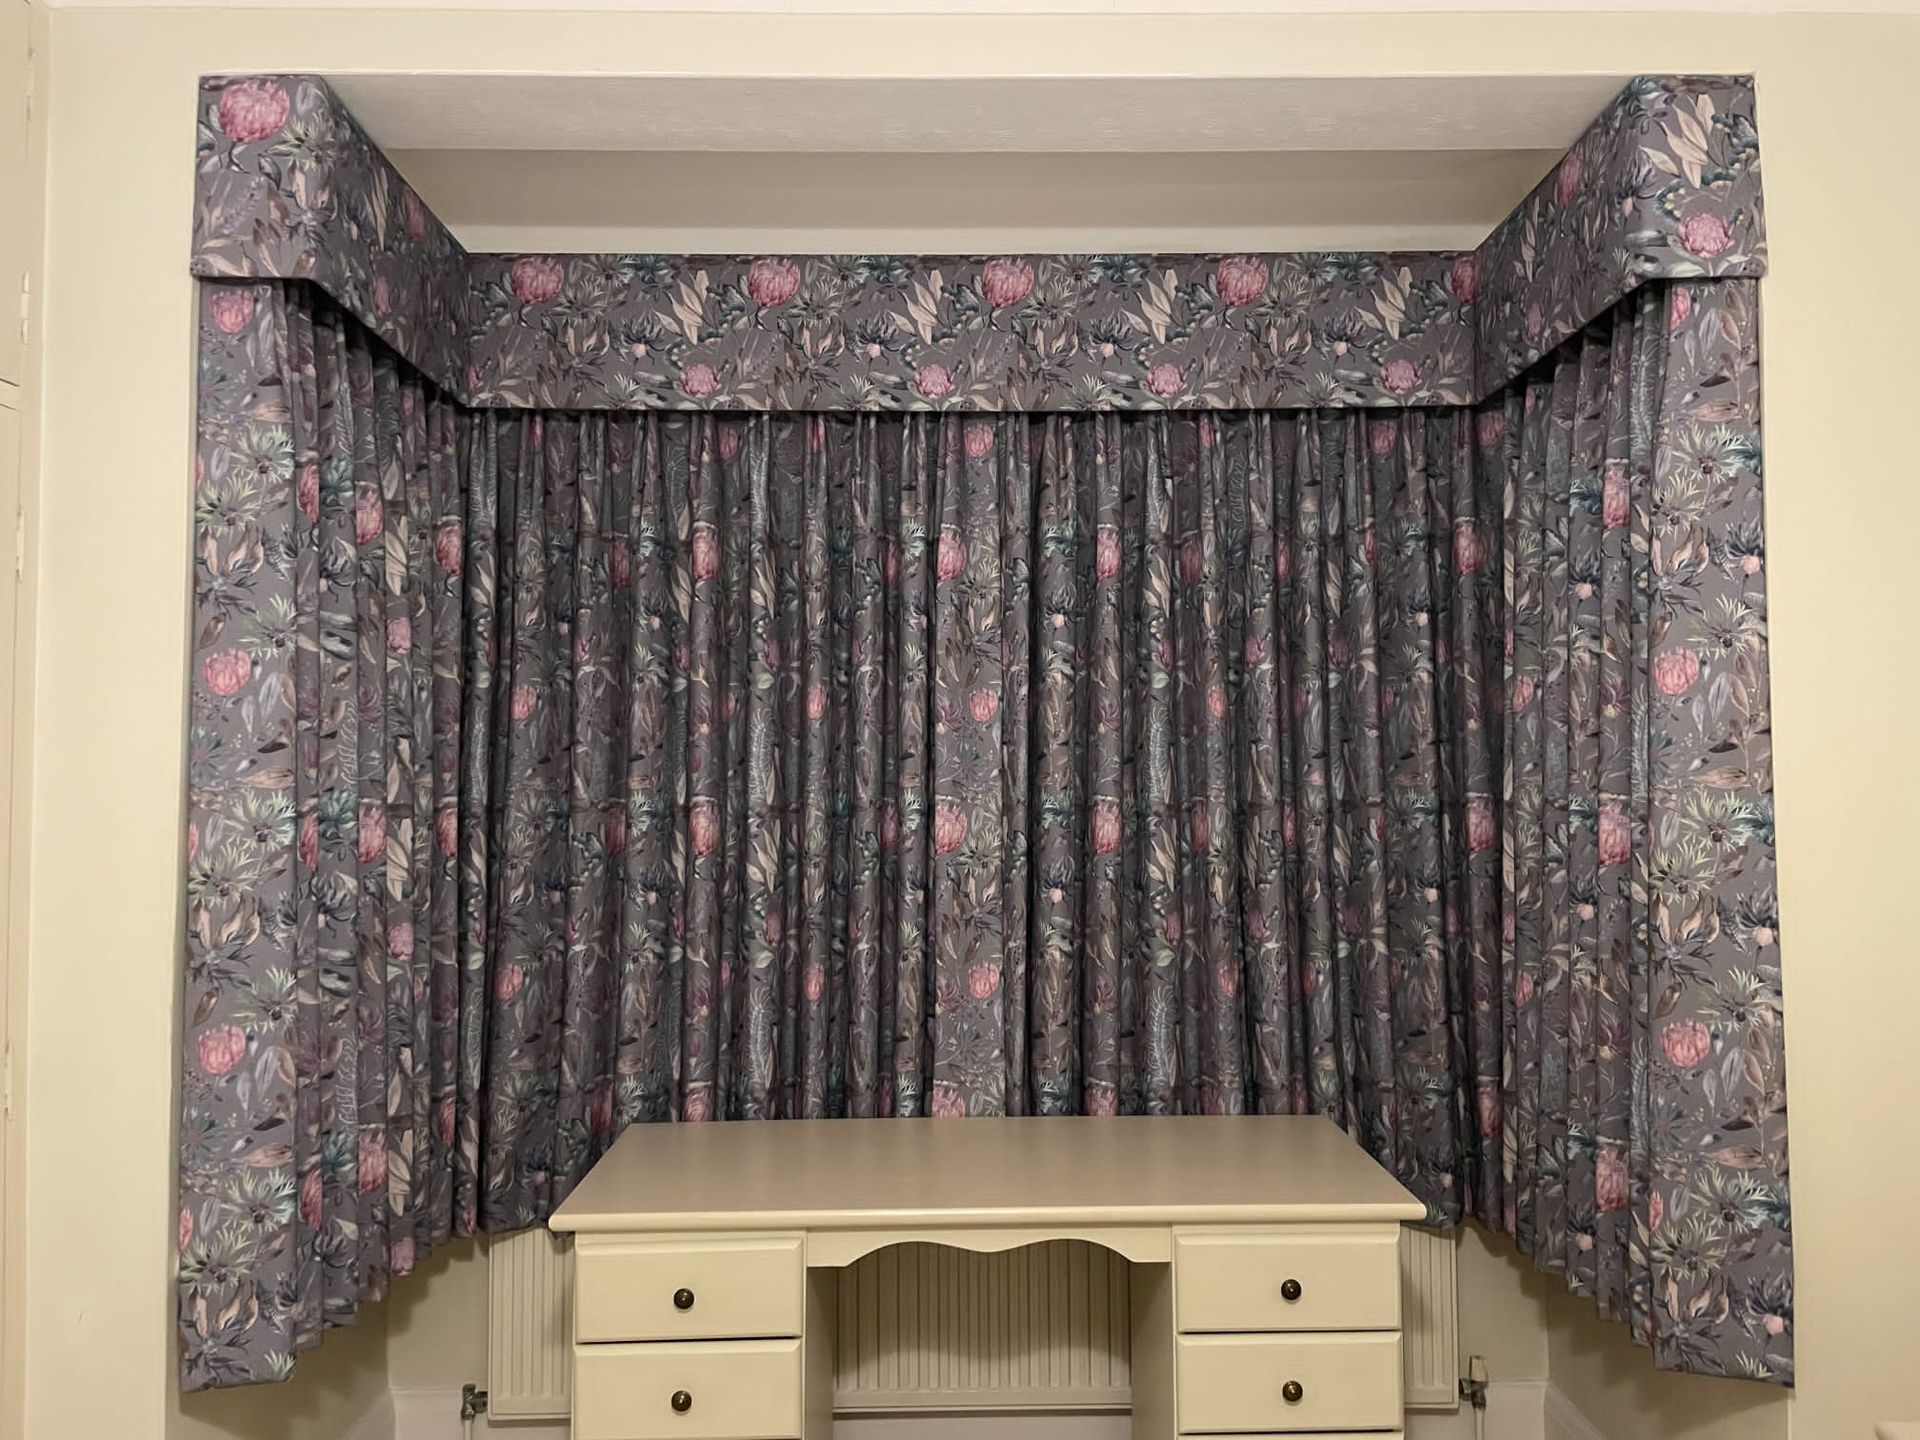 curtains, double pleat headed curtains, double pleat, double pinch pleat curtains, double pinch pleat, floor length curtains, curtains on a track, curtains and matching pelmet, bay window, bay window curtains, bay window pelmet, matching curtains and pelmet, curtains in a bay window